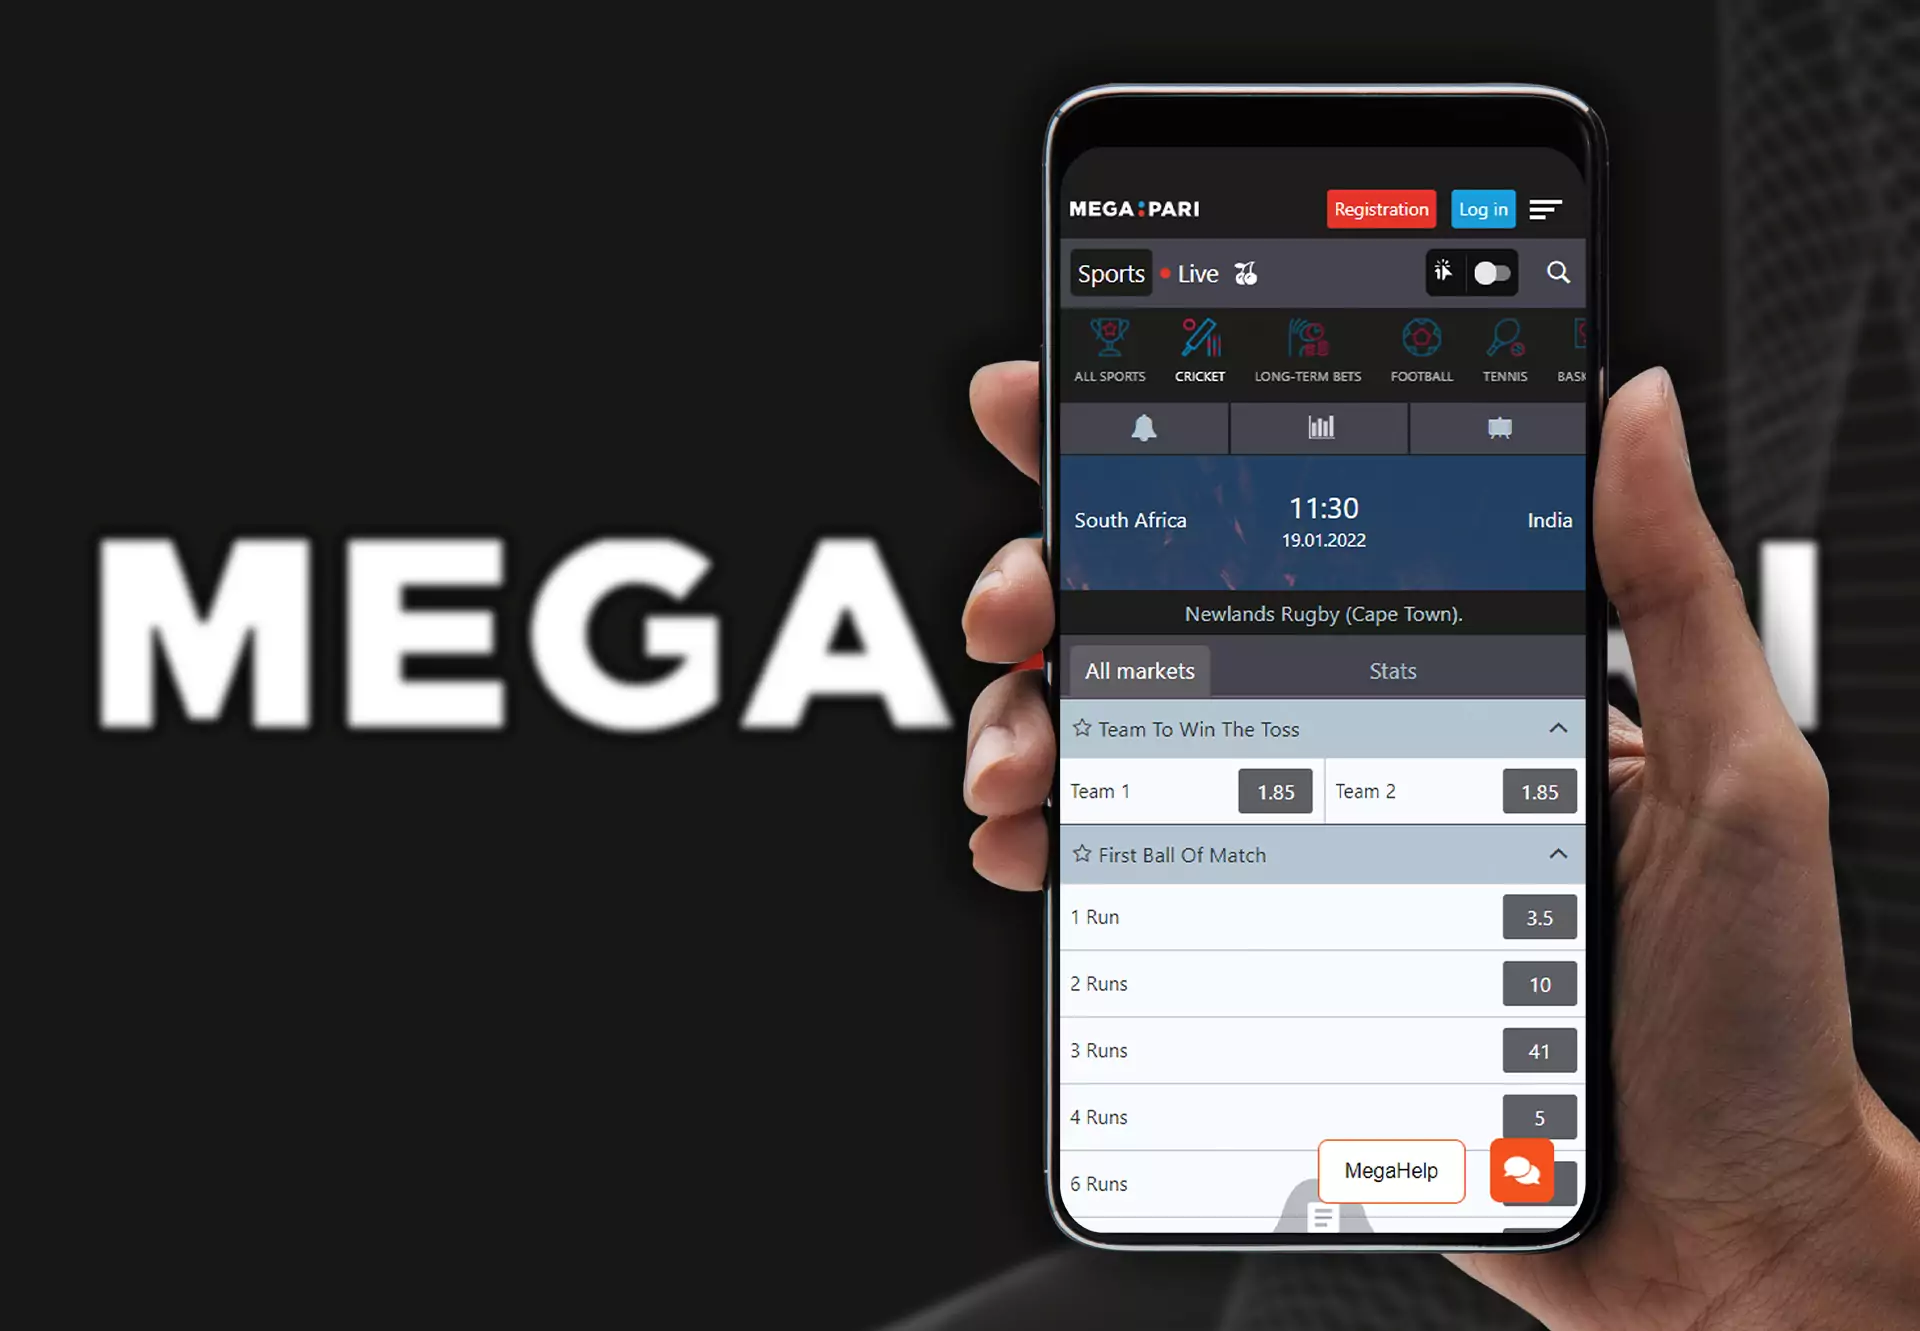 Betting on cricket is the most popular activity among Indian users of the MegaPari app.